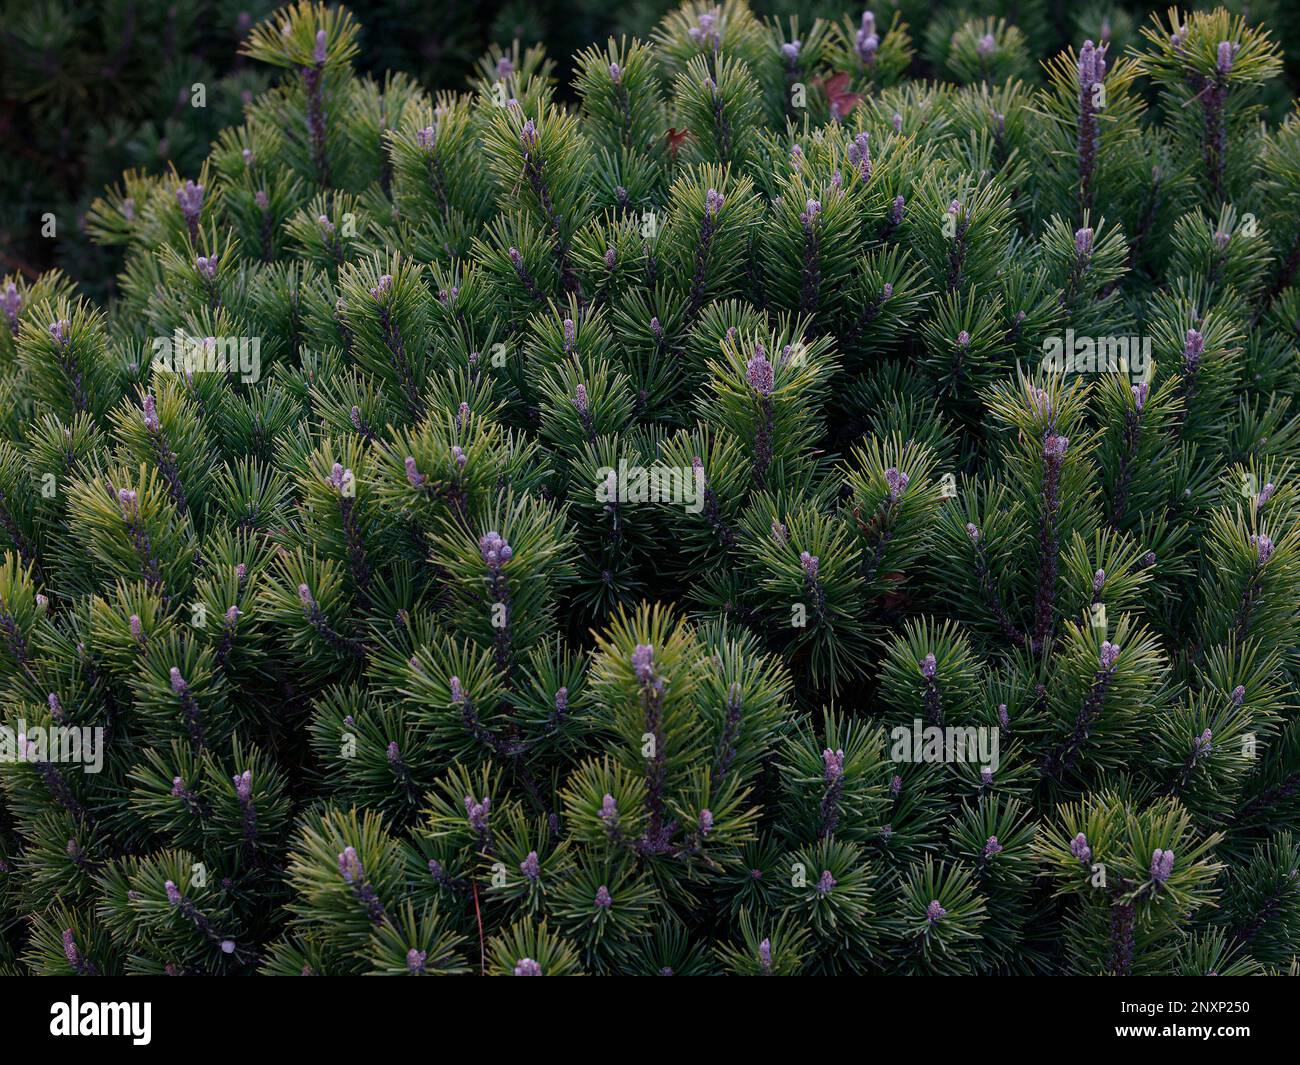 Closeup of the evergreen low and slow growing conifer Pinus mugo Mops or Dwarf Mountain Pine. Stock Photo